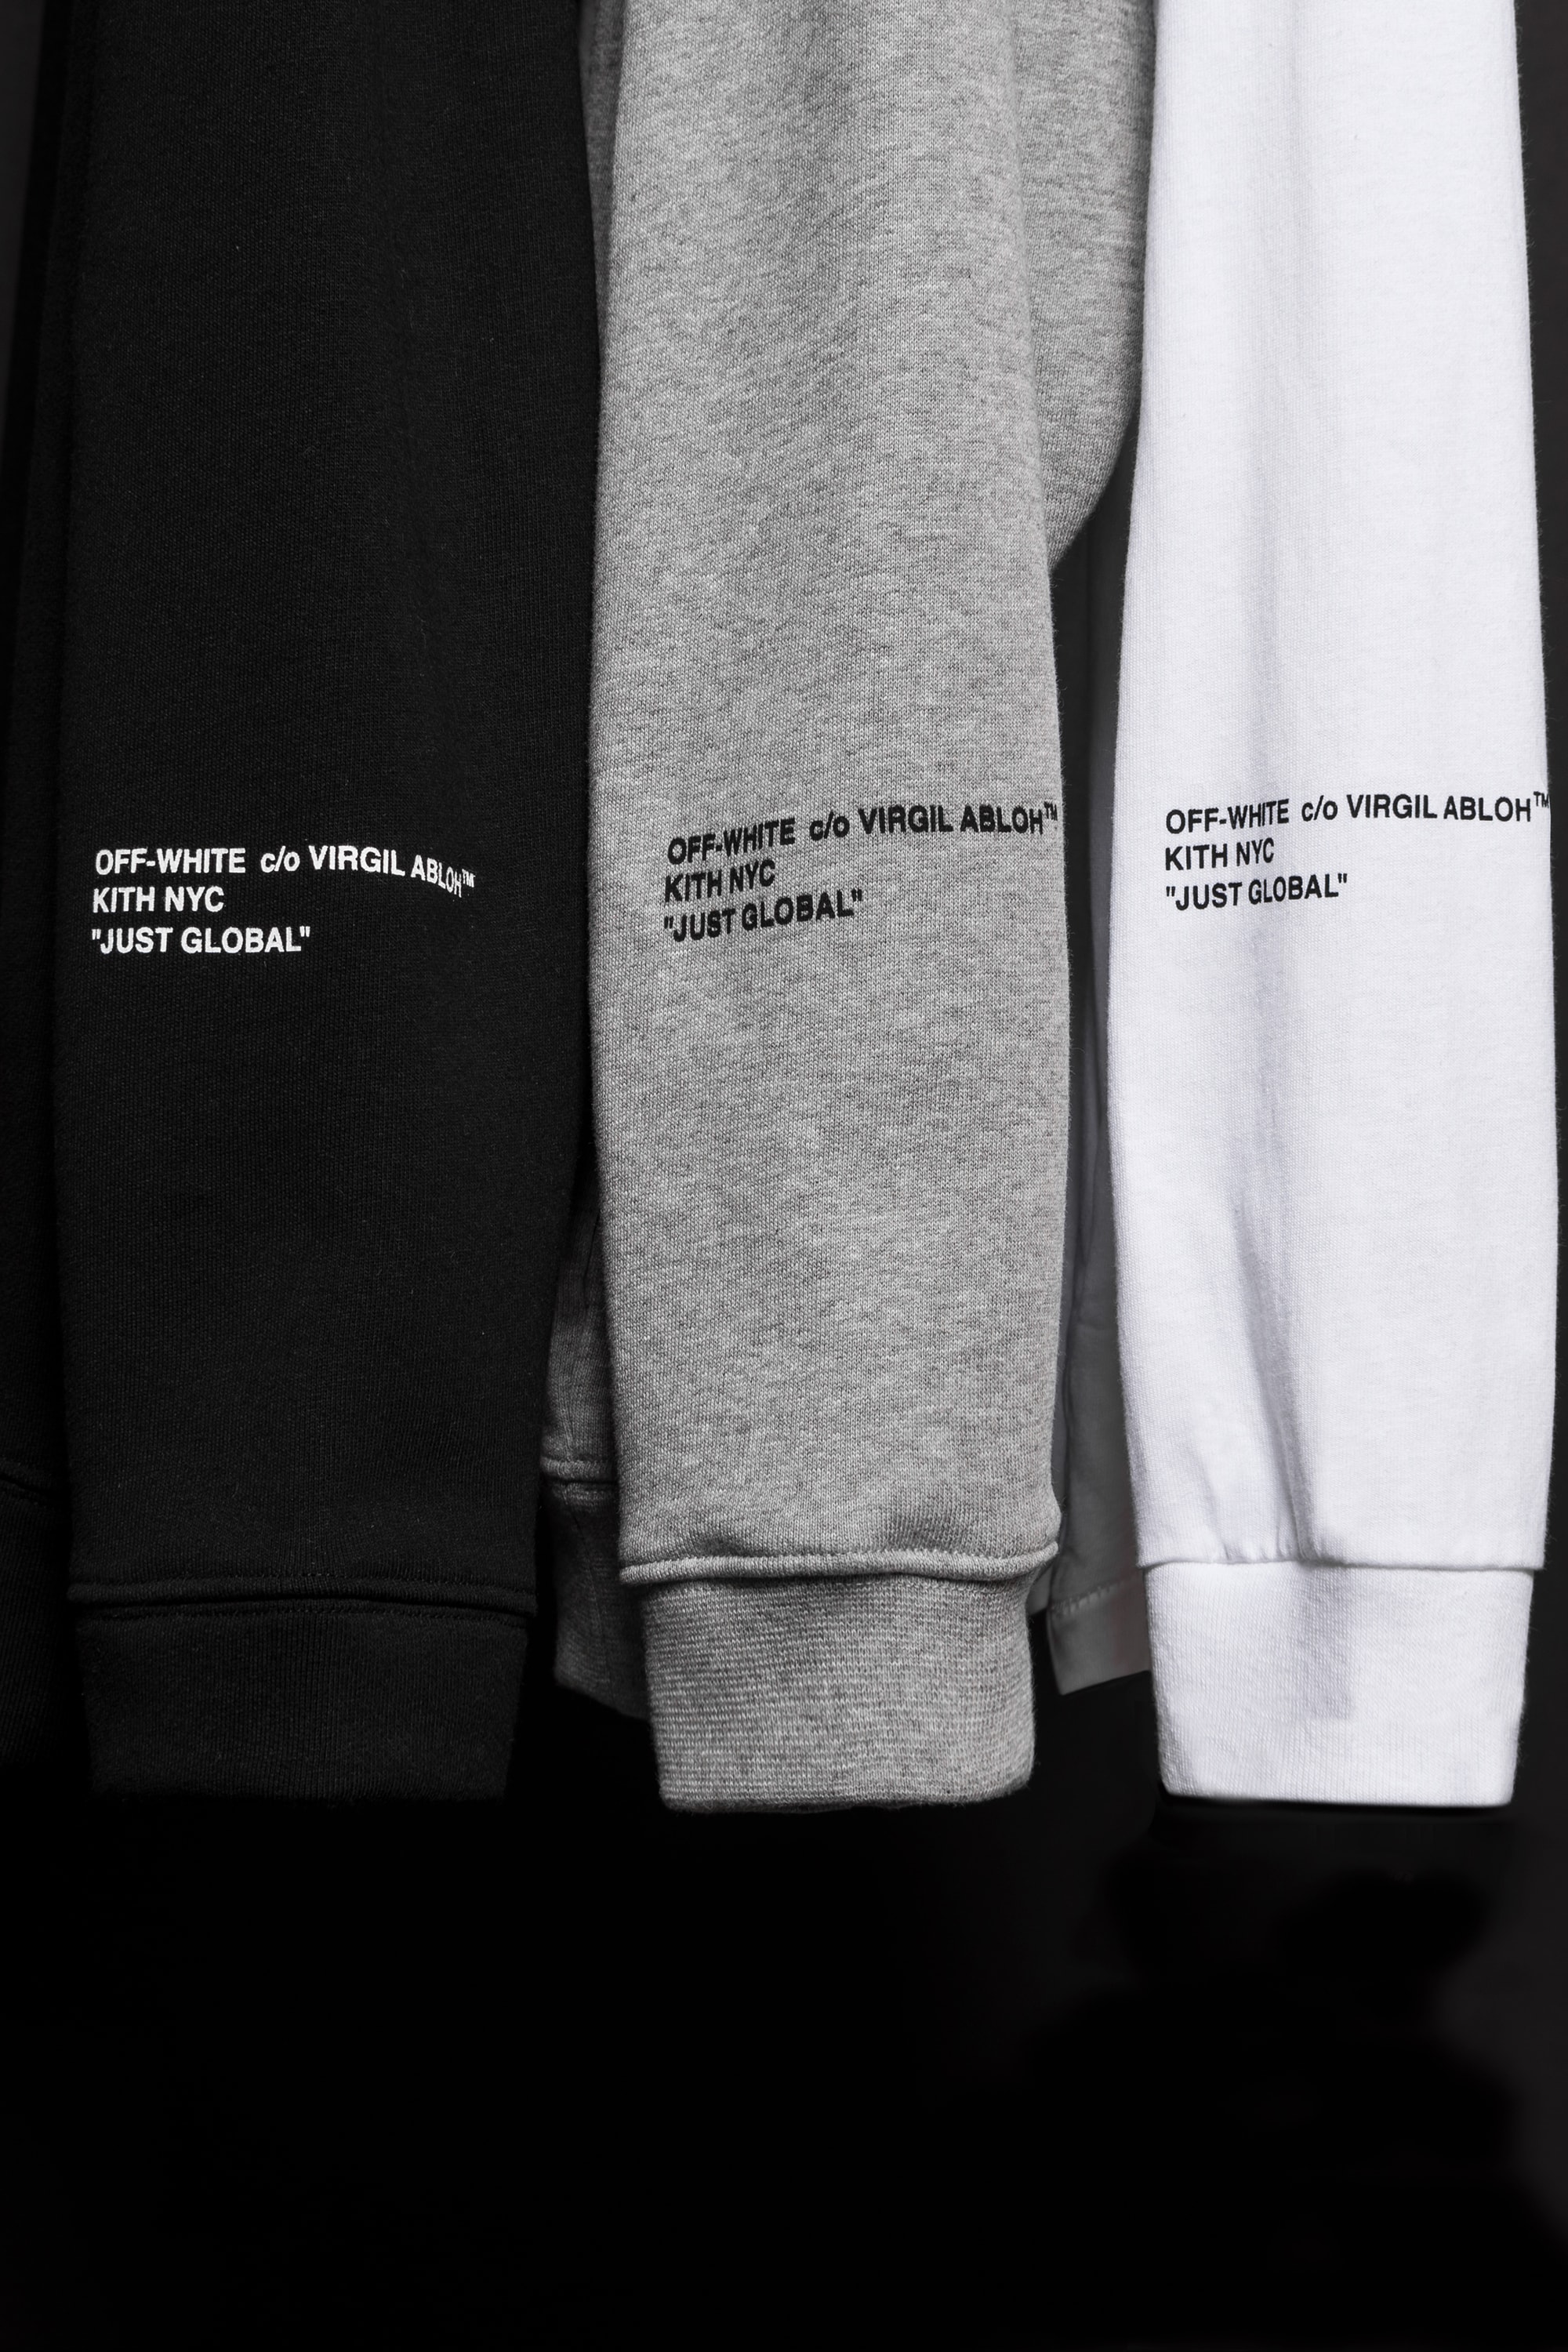 KITH Off White 2017 Just Global Capsule Collection Just Us fashion hoodie crewneck t-shirt black grey white